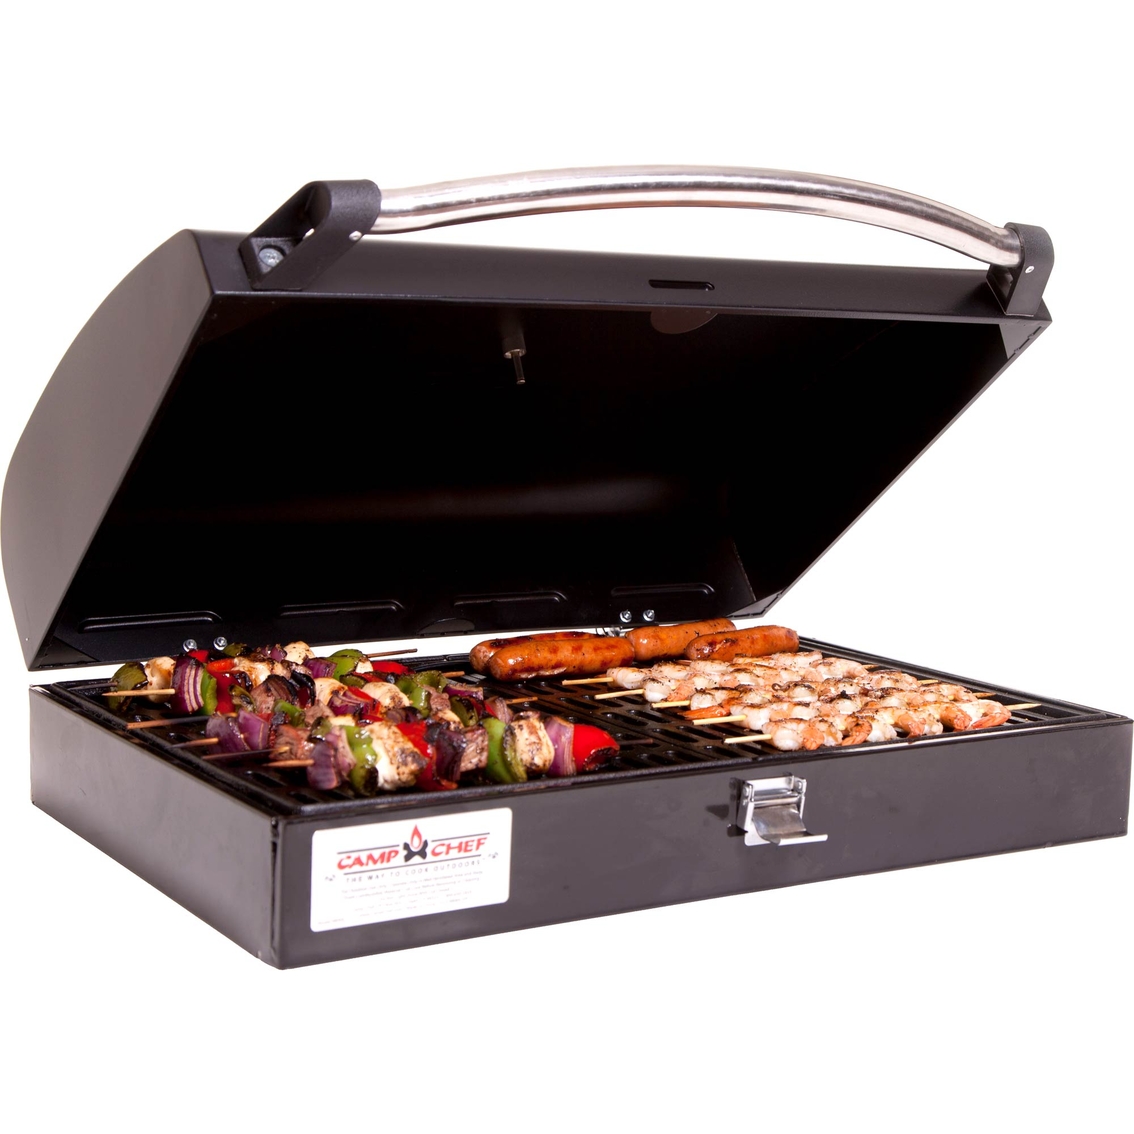 Camp Chef Deluxe BBQ Grill Box Accessory - Image 2 of 4